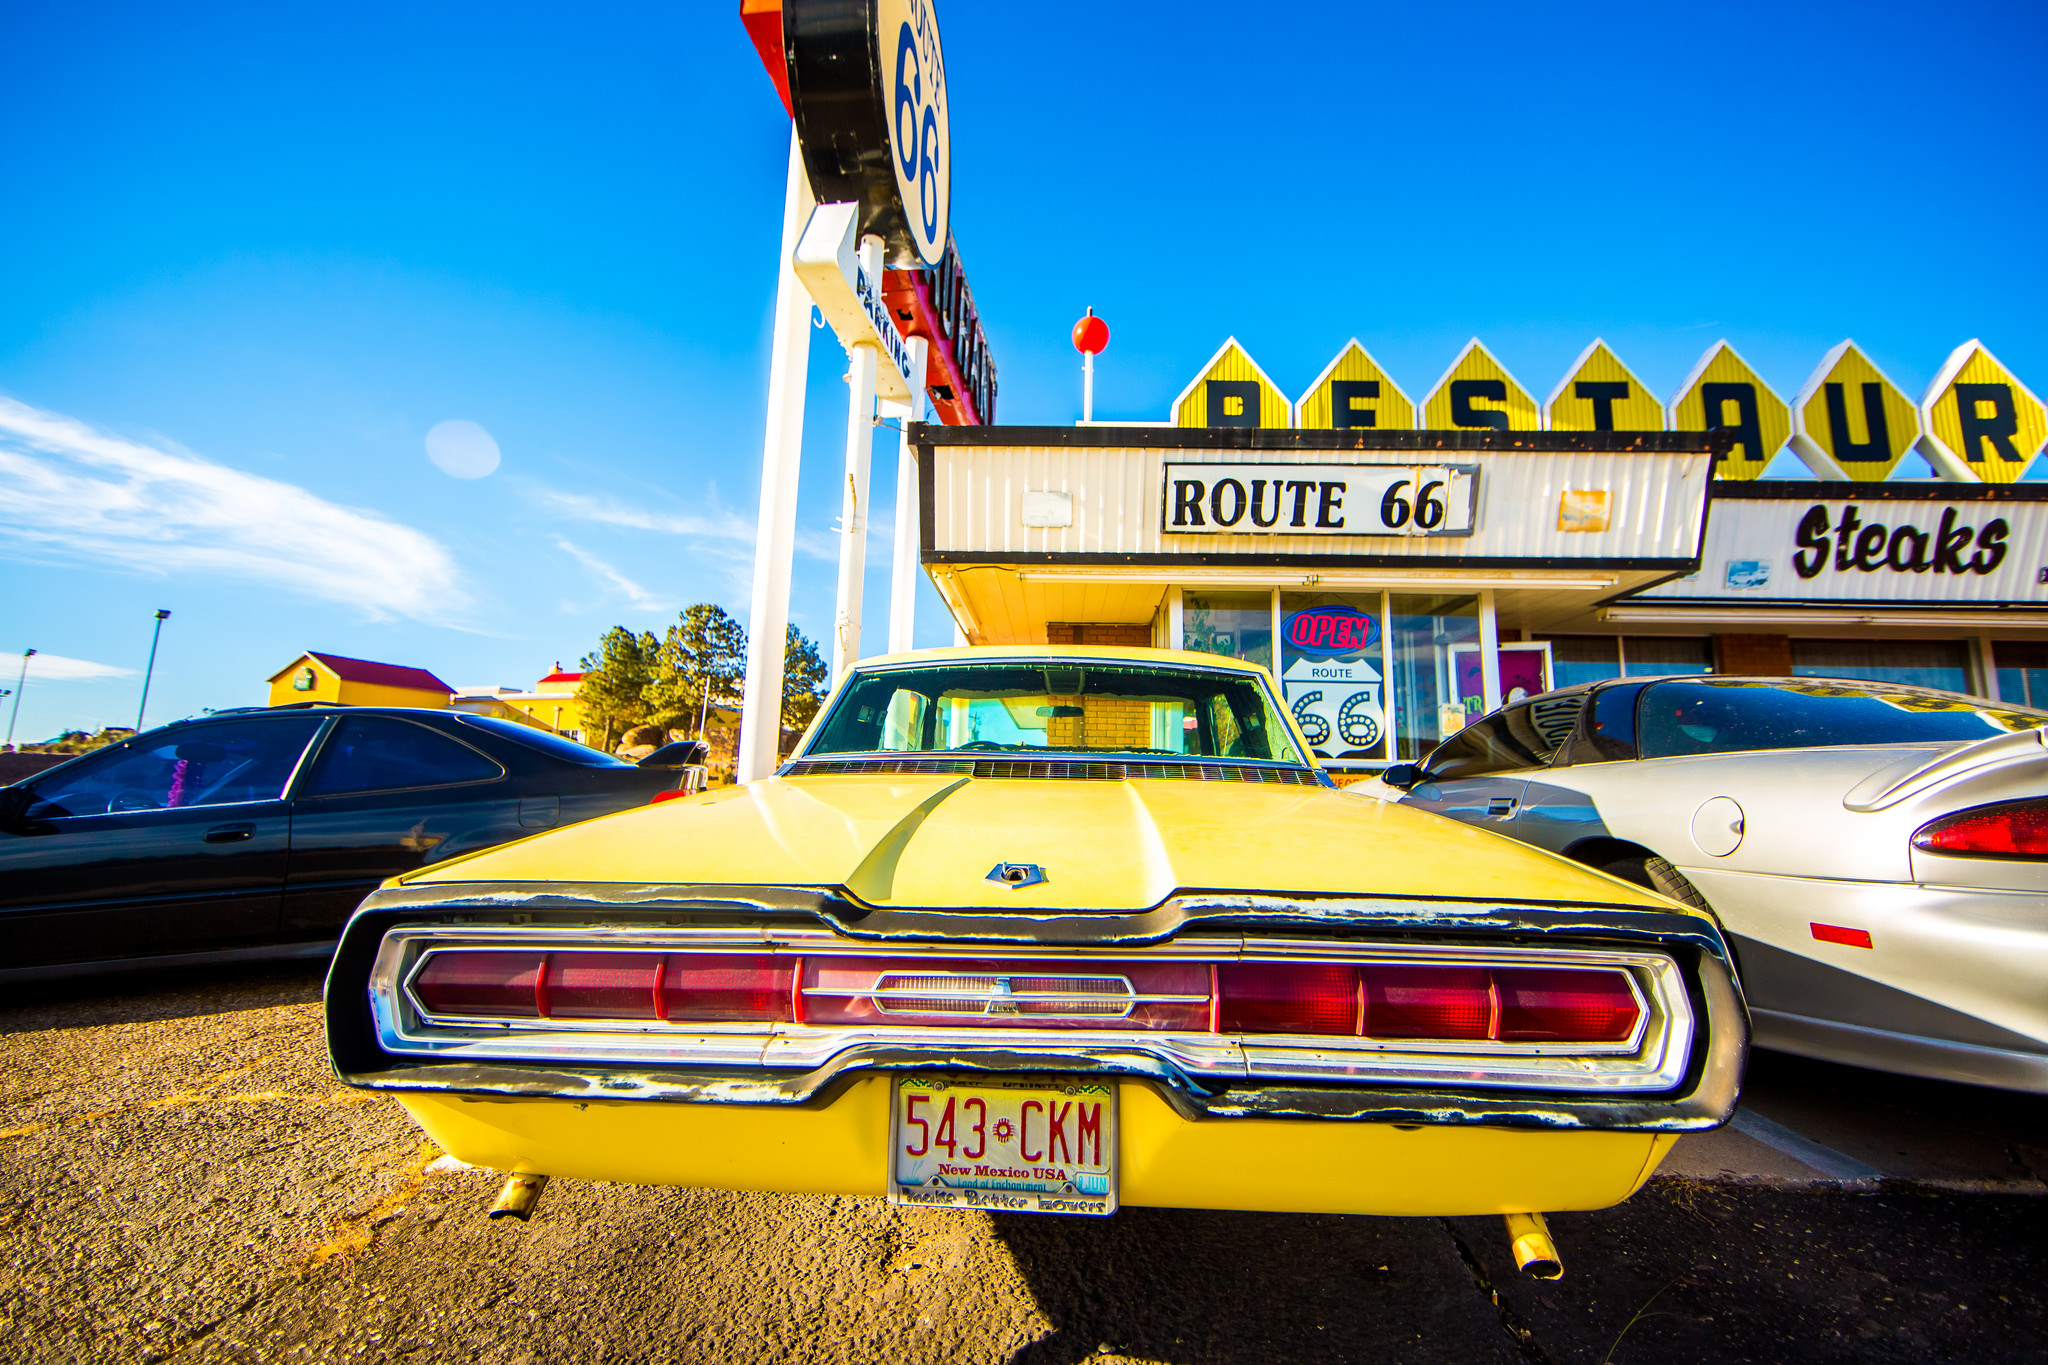 Five Classic American Road Trips You Need to Make (A Little) Time to Take